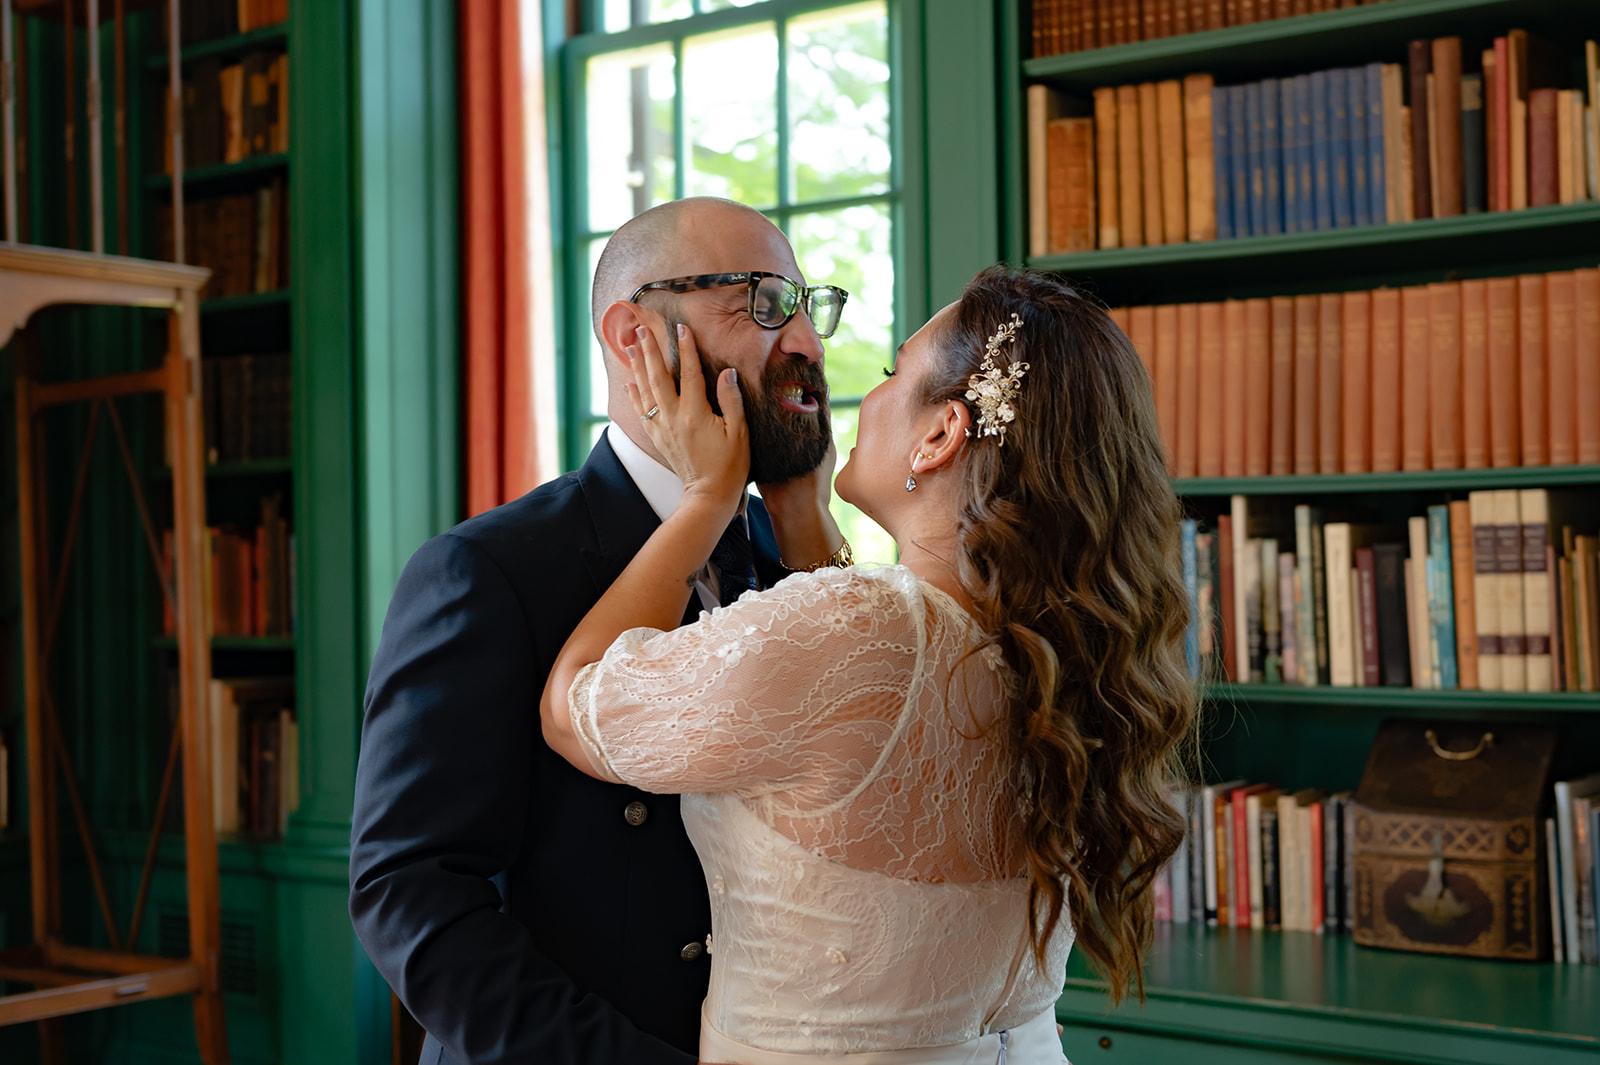 The Wedding Website of Andrea Reyes-Vega and Mohammad Tahboub